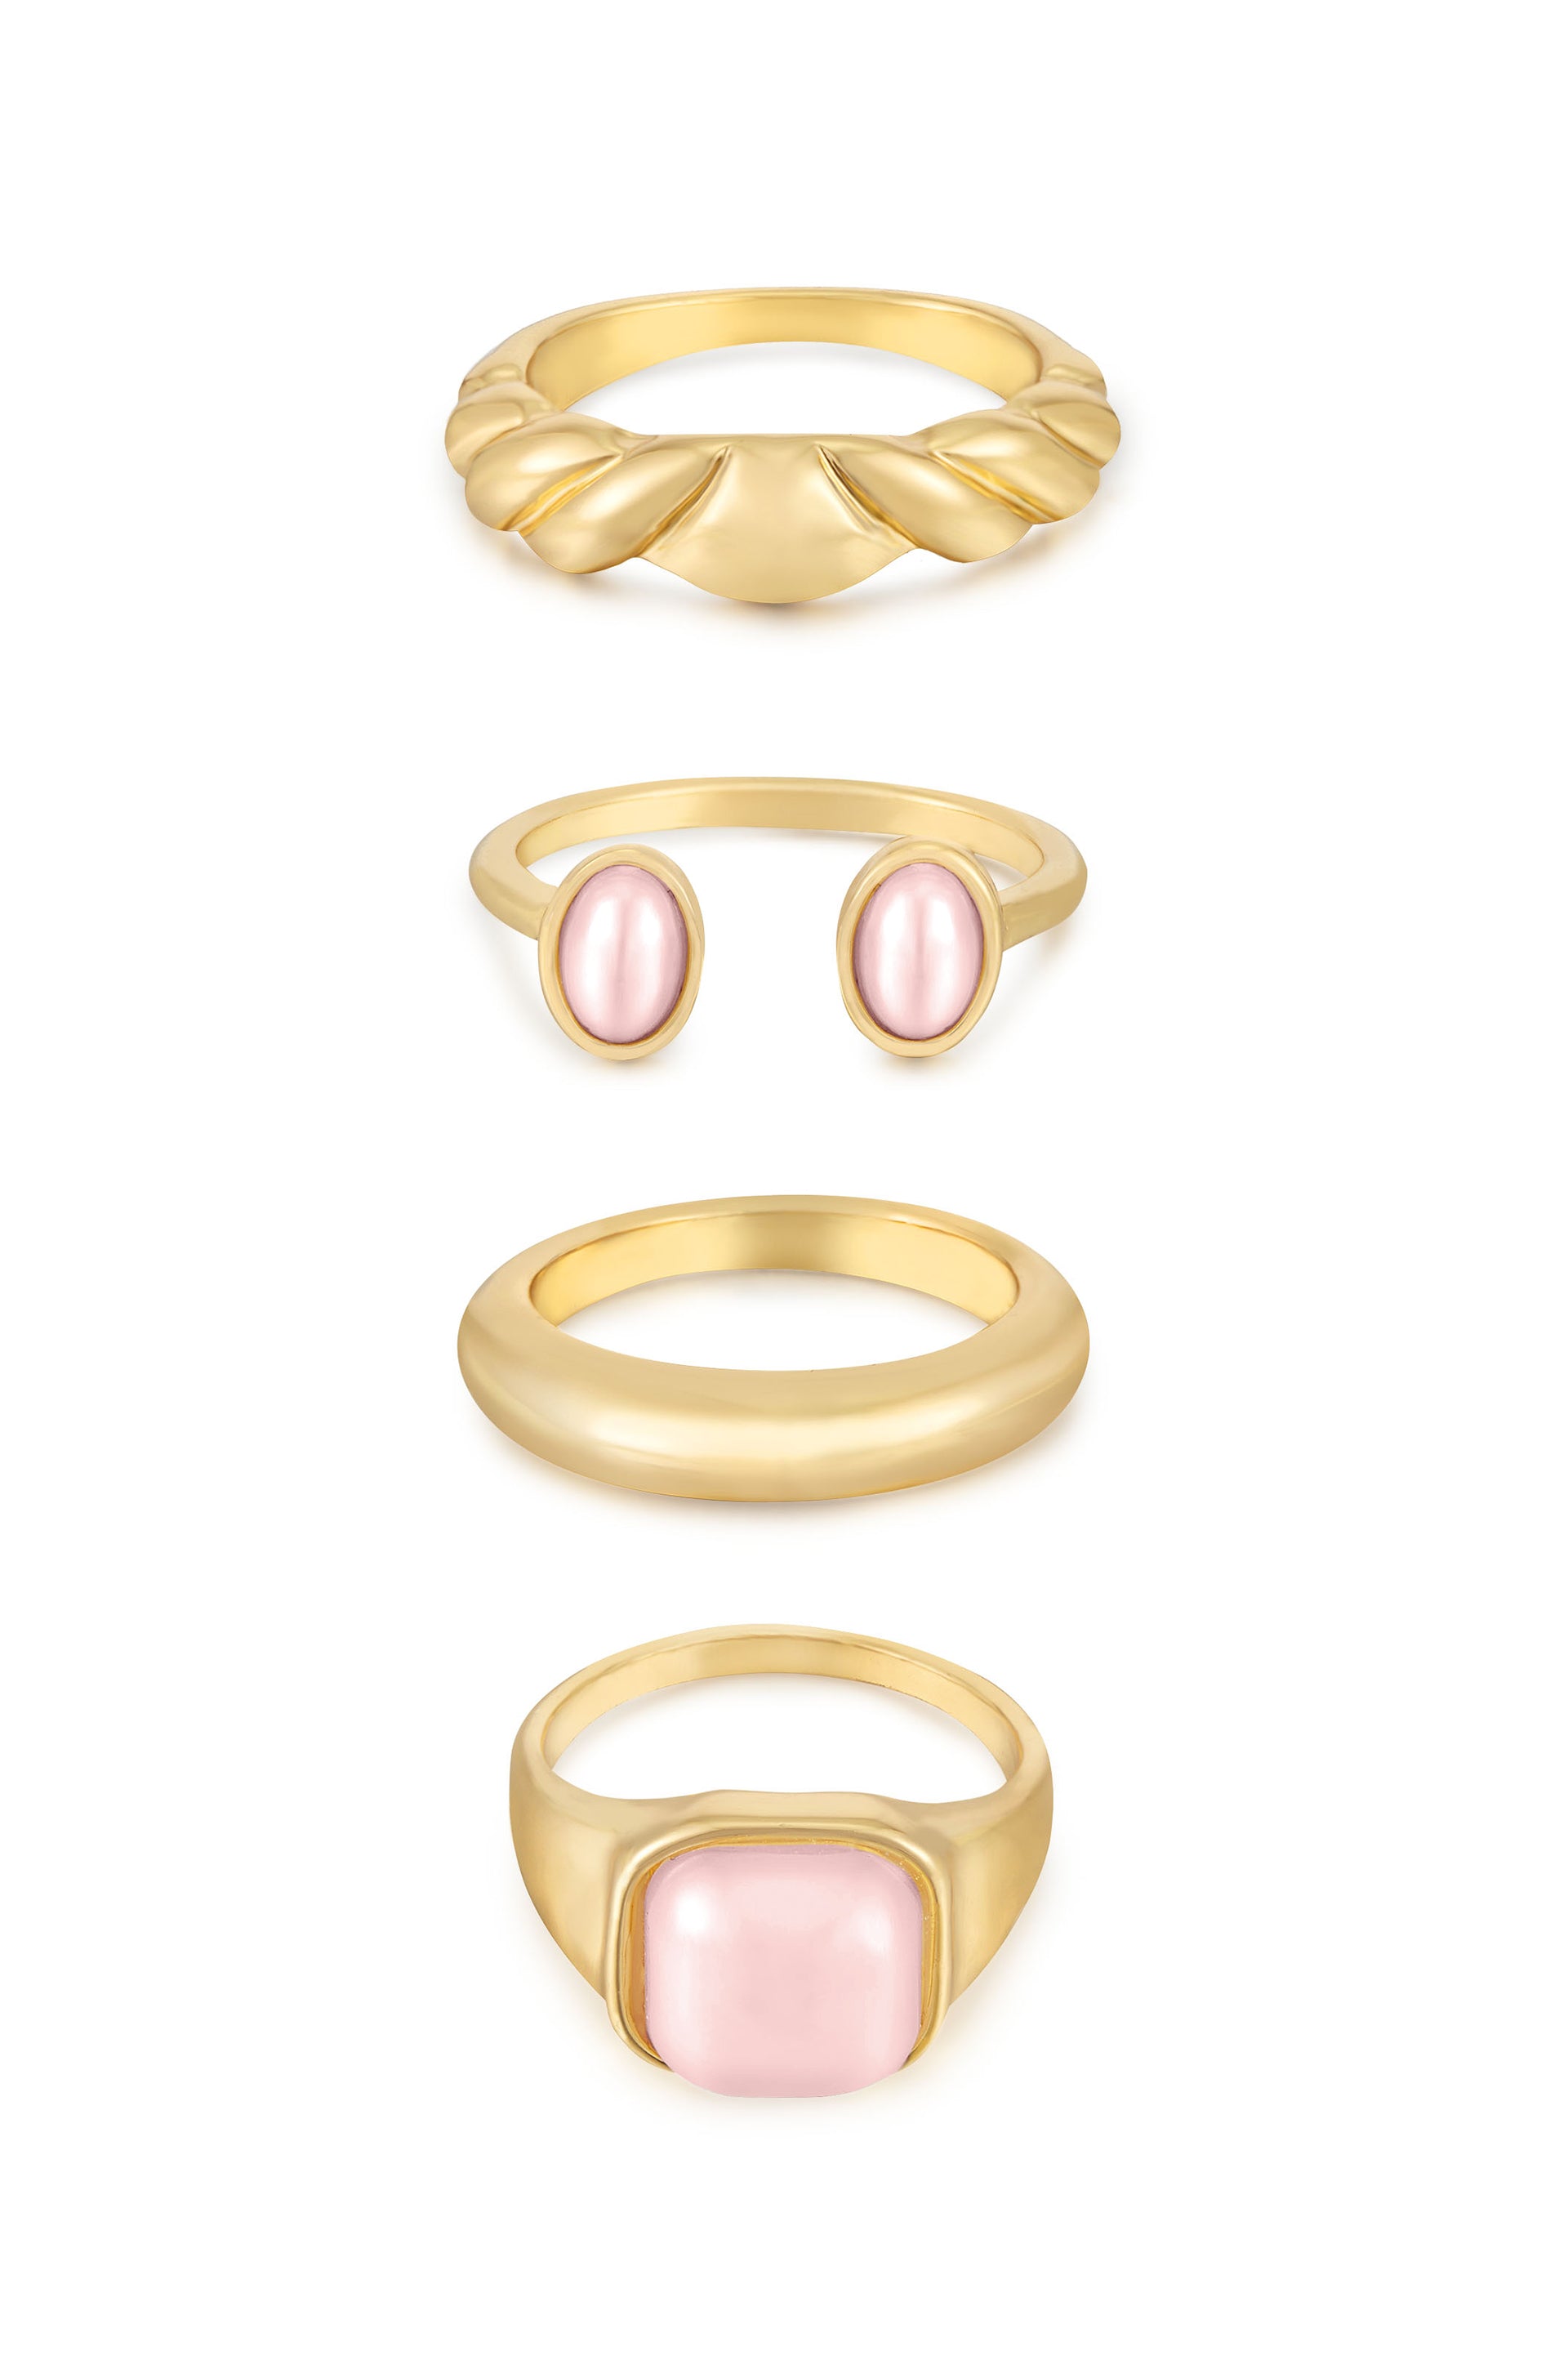 Ultimate Babe 18k Gold Plated Ring Set in pink